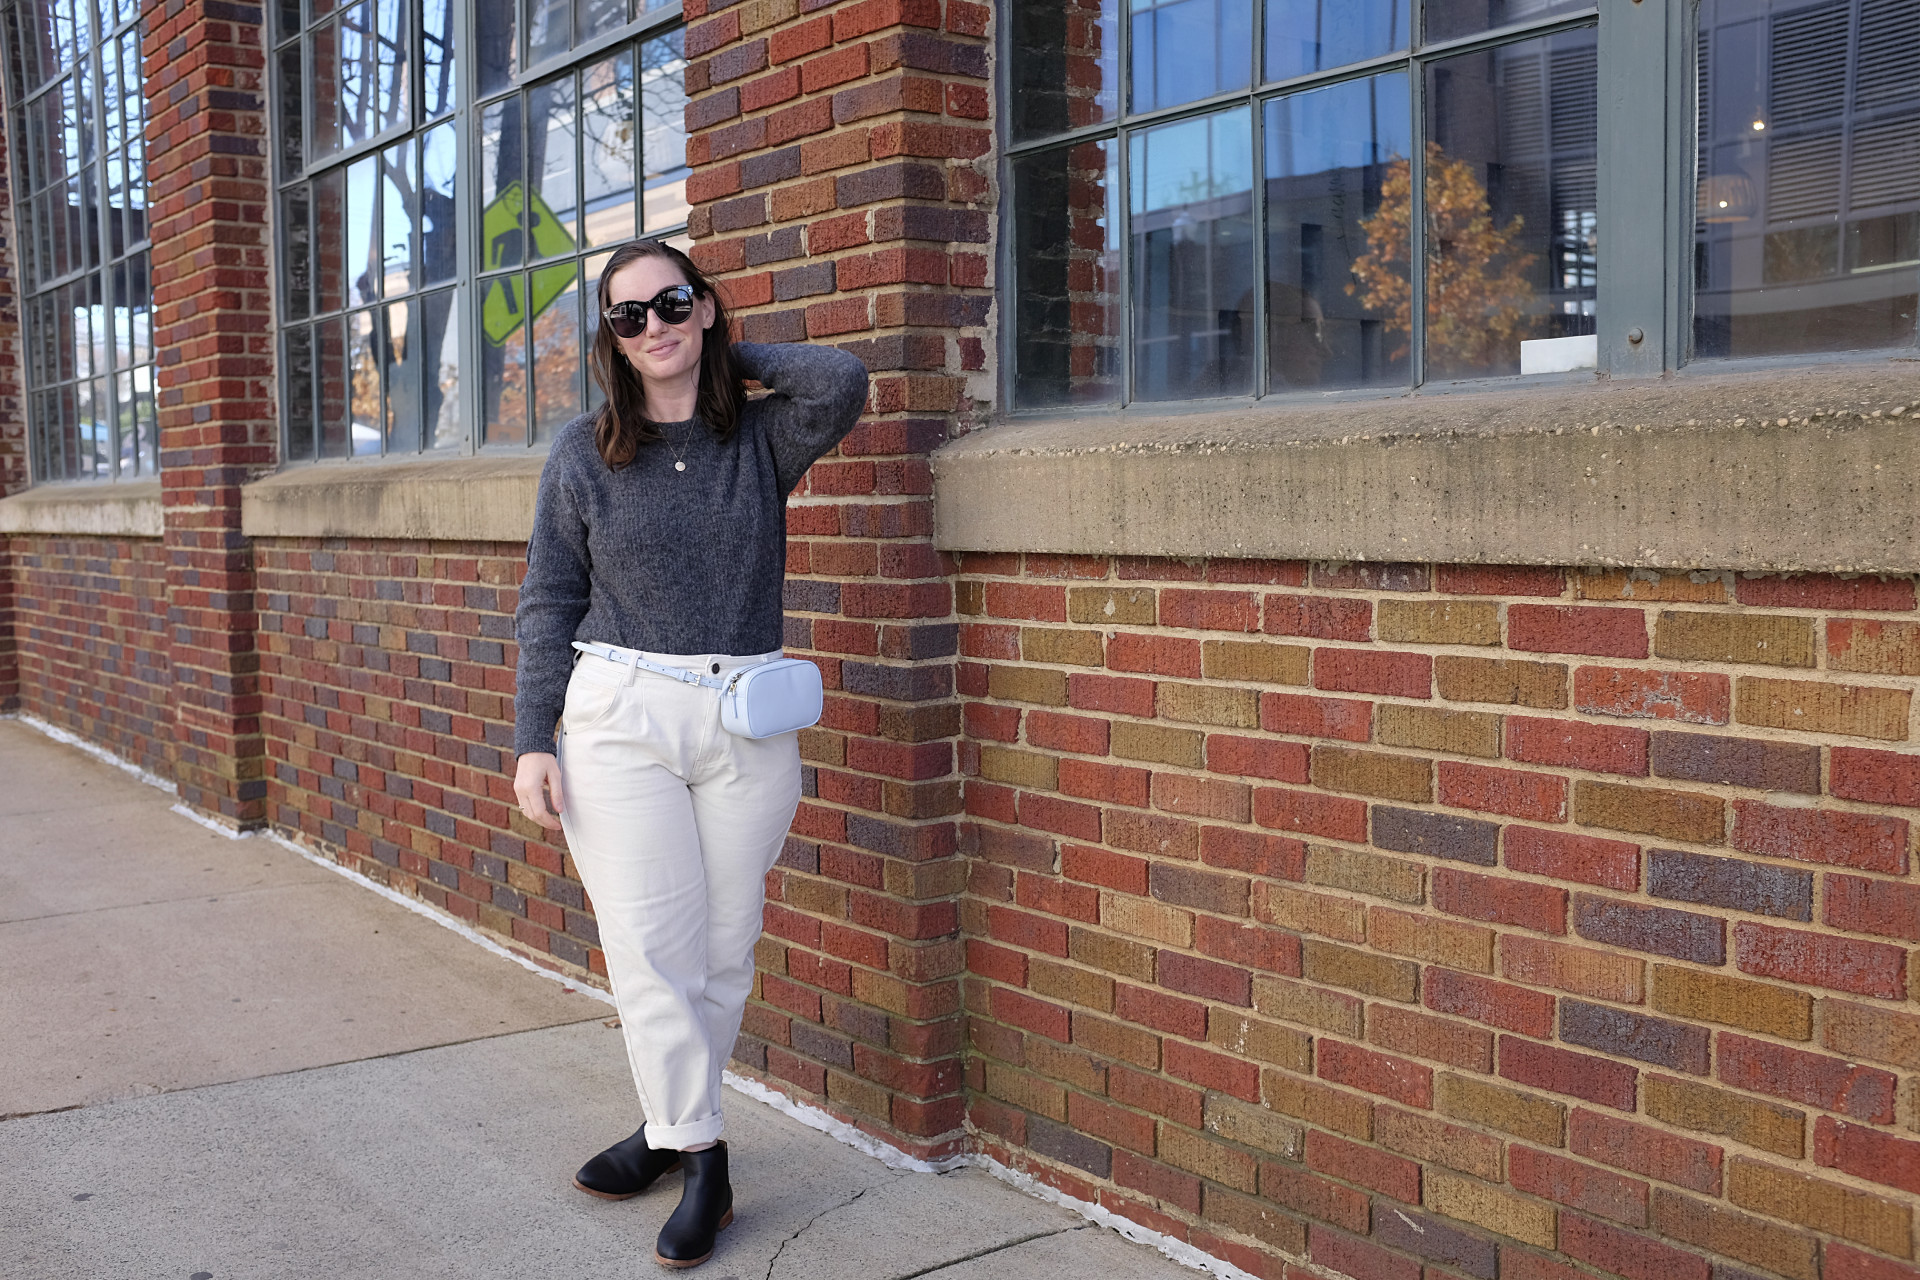 Alyssa is standing in front of a brick building. She is wearing a grey sweater with off-white pants, black sunglasses, a light blue belt bag, and black boots. She has her left hand in her hair and it is windy.